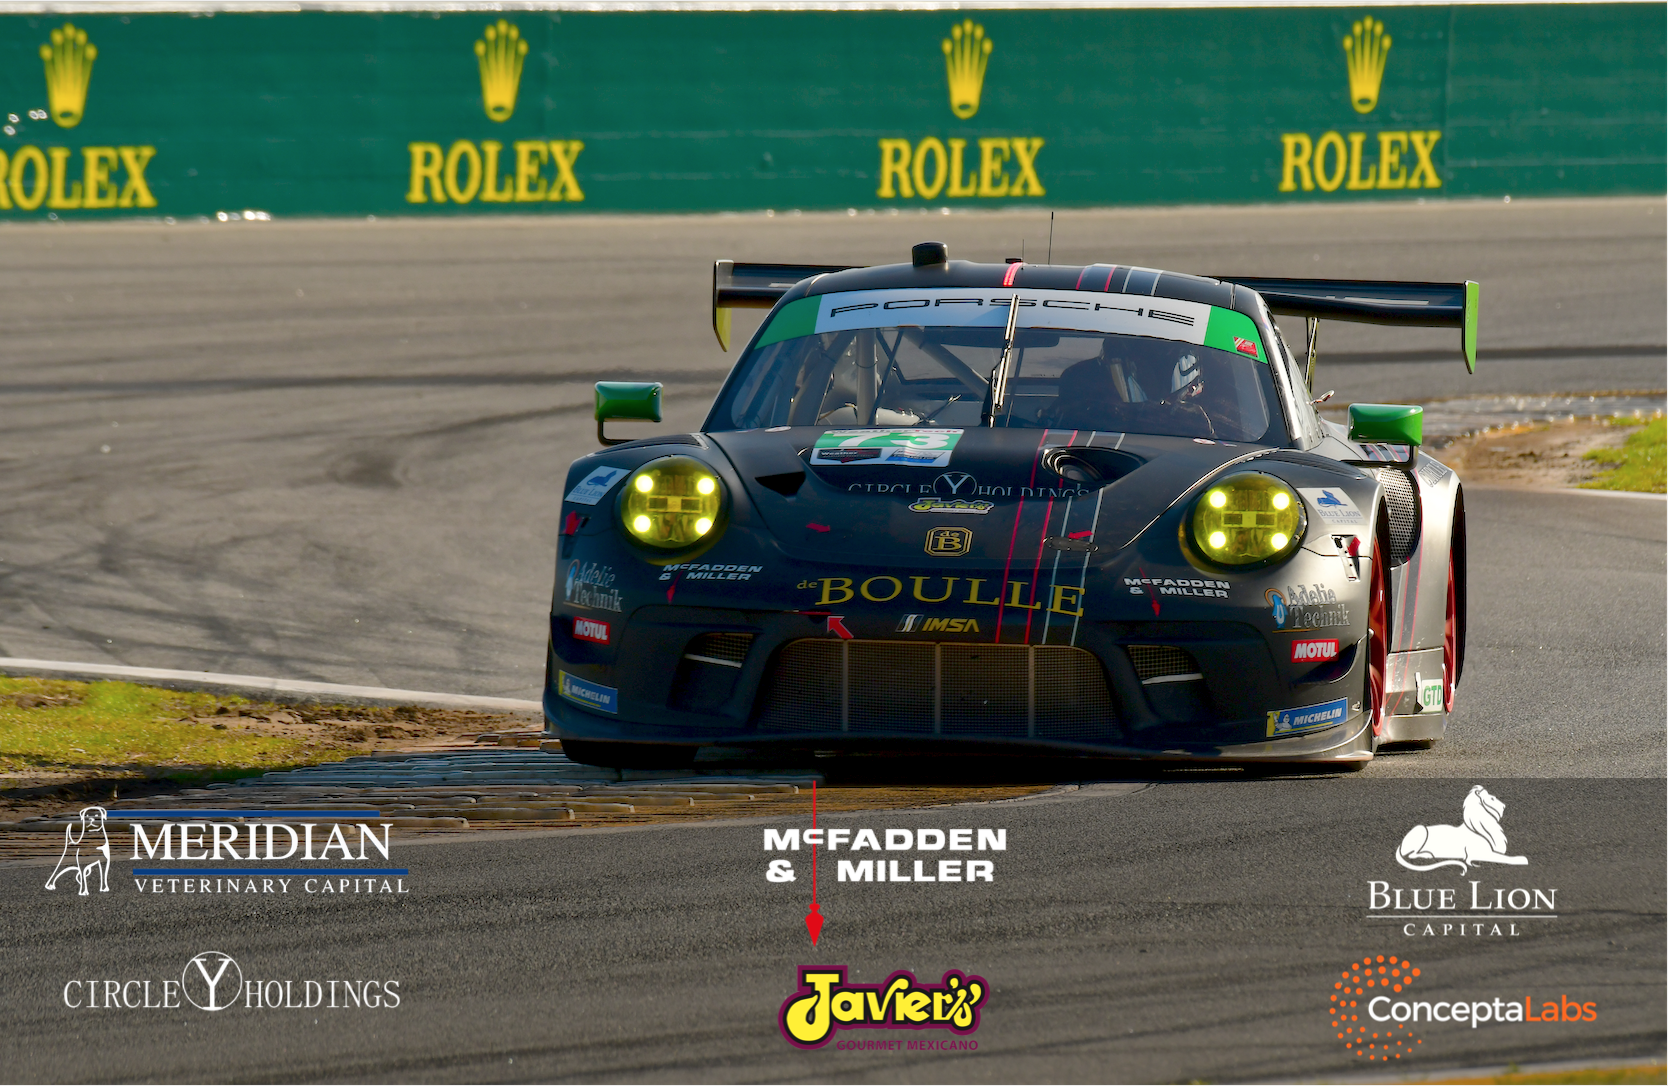 7th Place Finish in ROLEX 24 Hours of Daytona Motorsports, Blog